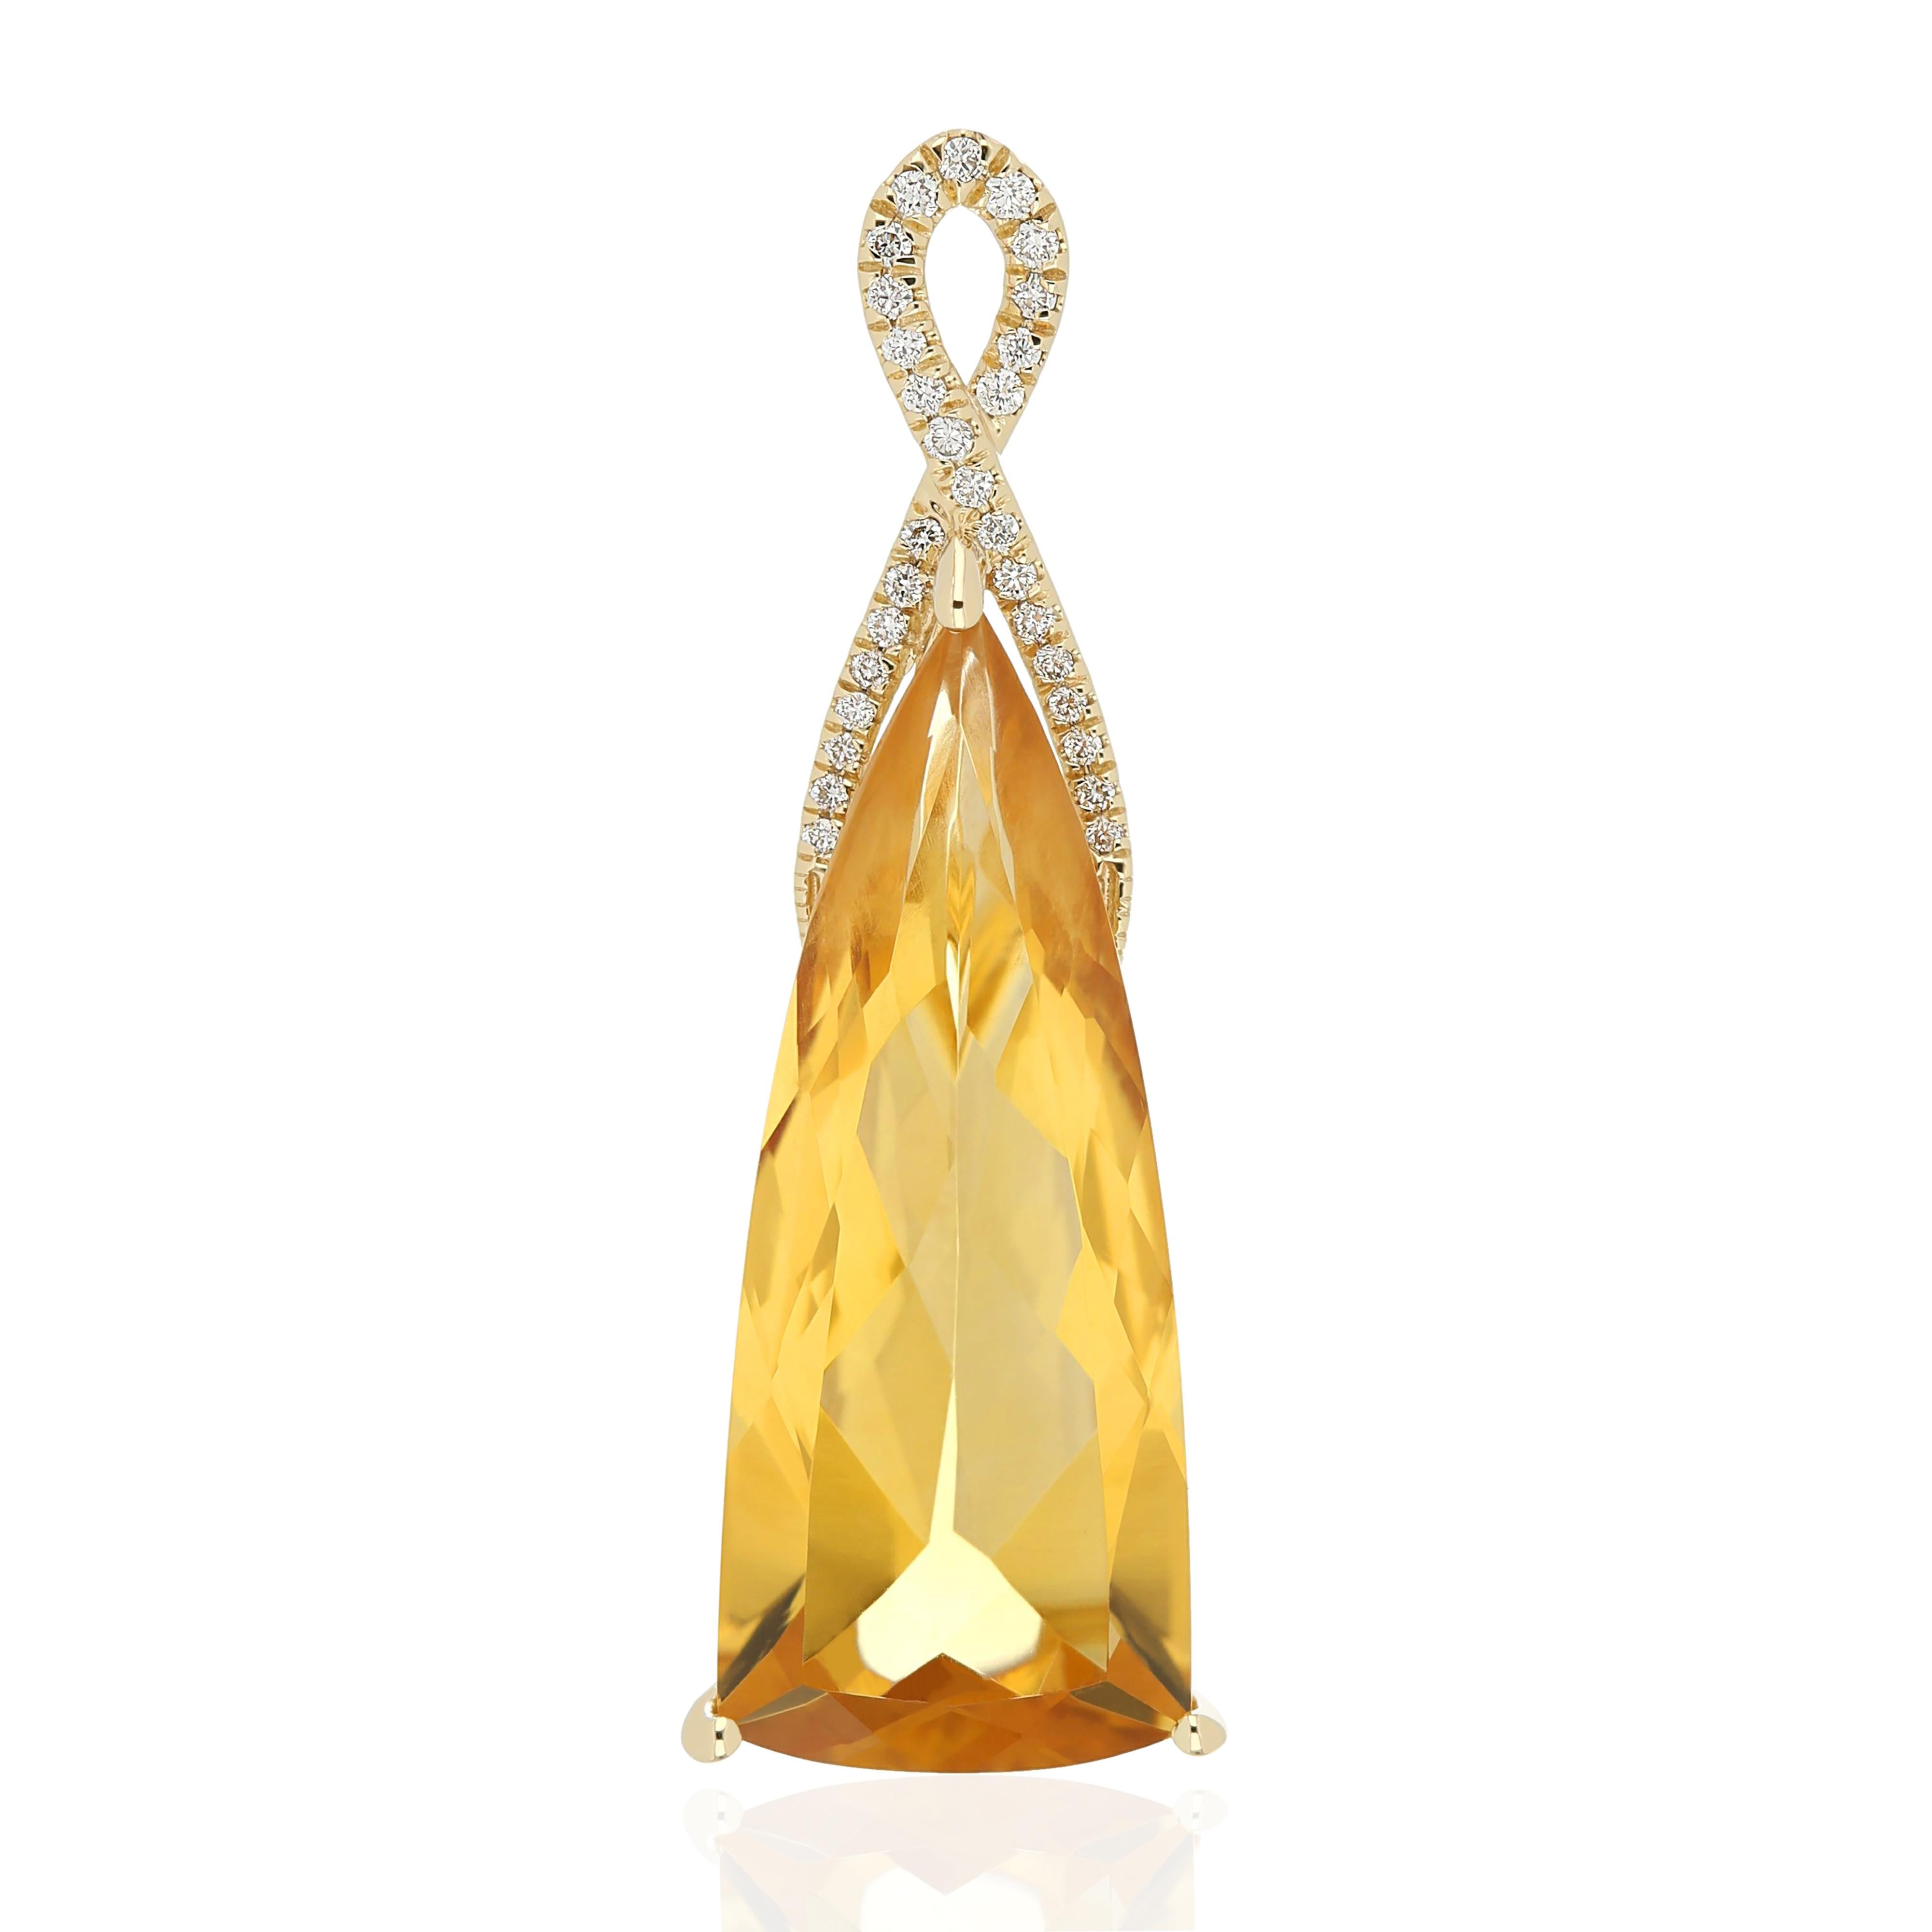 Elegant and exquisitely detailed 14 Karat Yellow Gold Pendant, center set with 9.05Cts .Trillion Shape Citrine and micro pave set Diamonds, weighing approx. 0.09 Cts Beautifully Hand crafted in 14 Karat Yellow Gold.

Stone Detail:
Citrine: